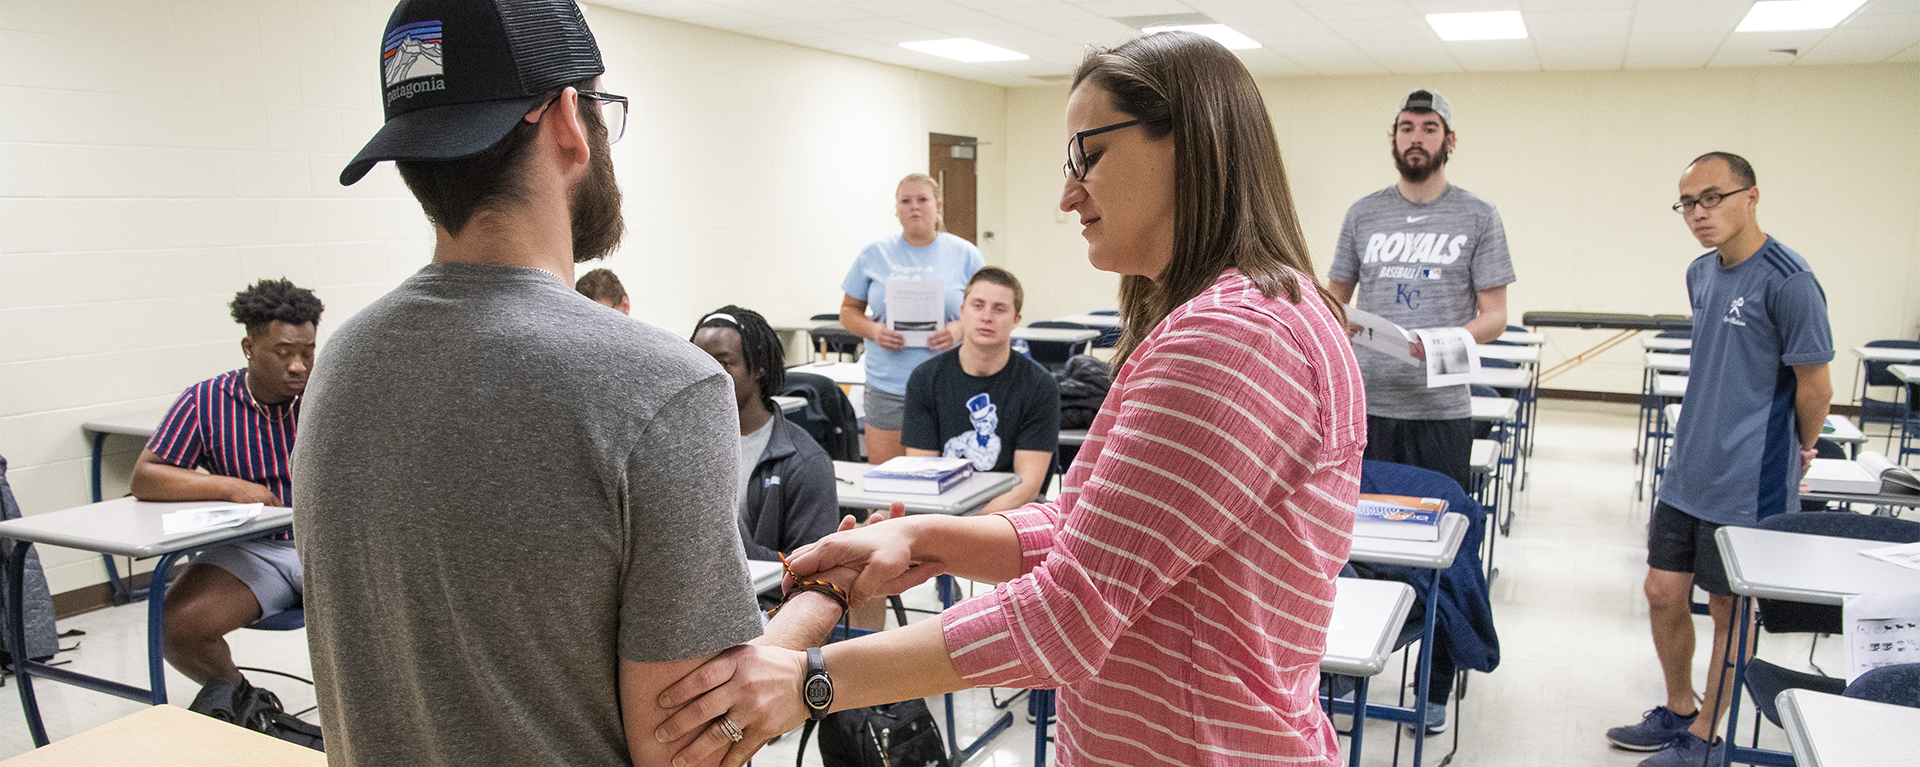 A professor demonstrates a reflex test in front of a class of kinesiology students.